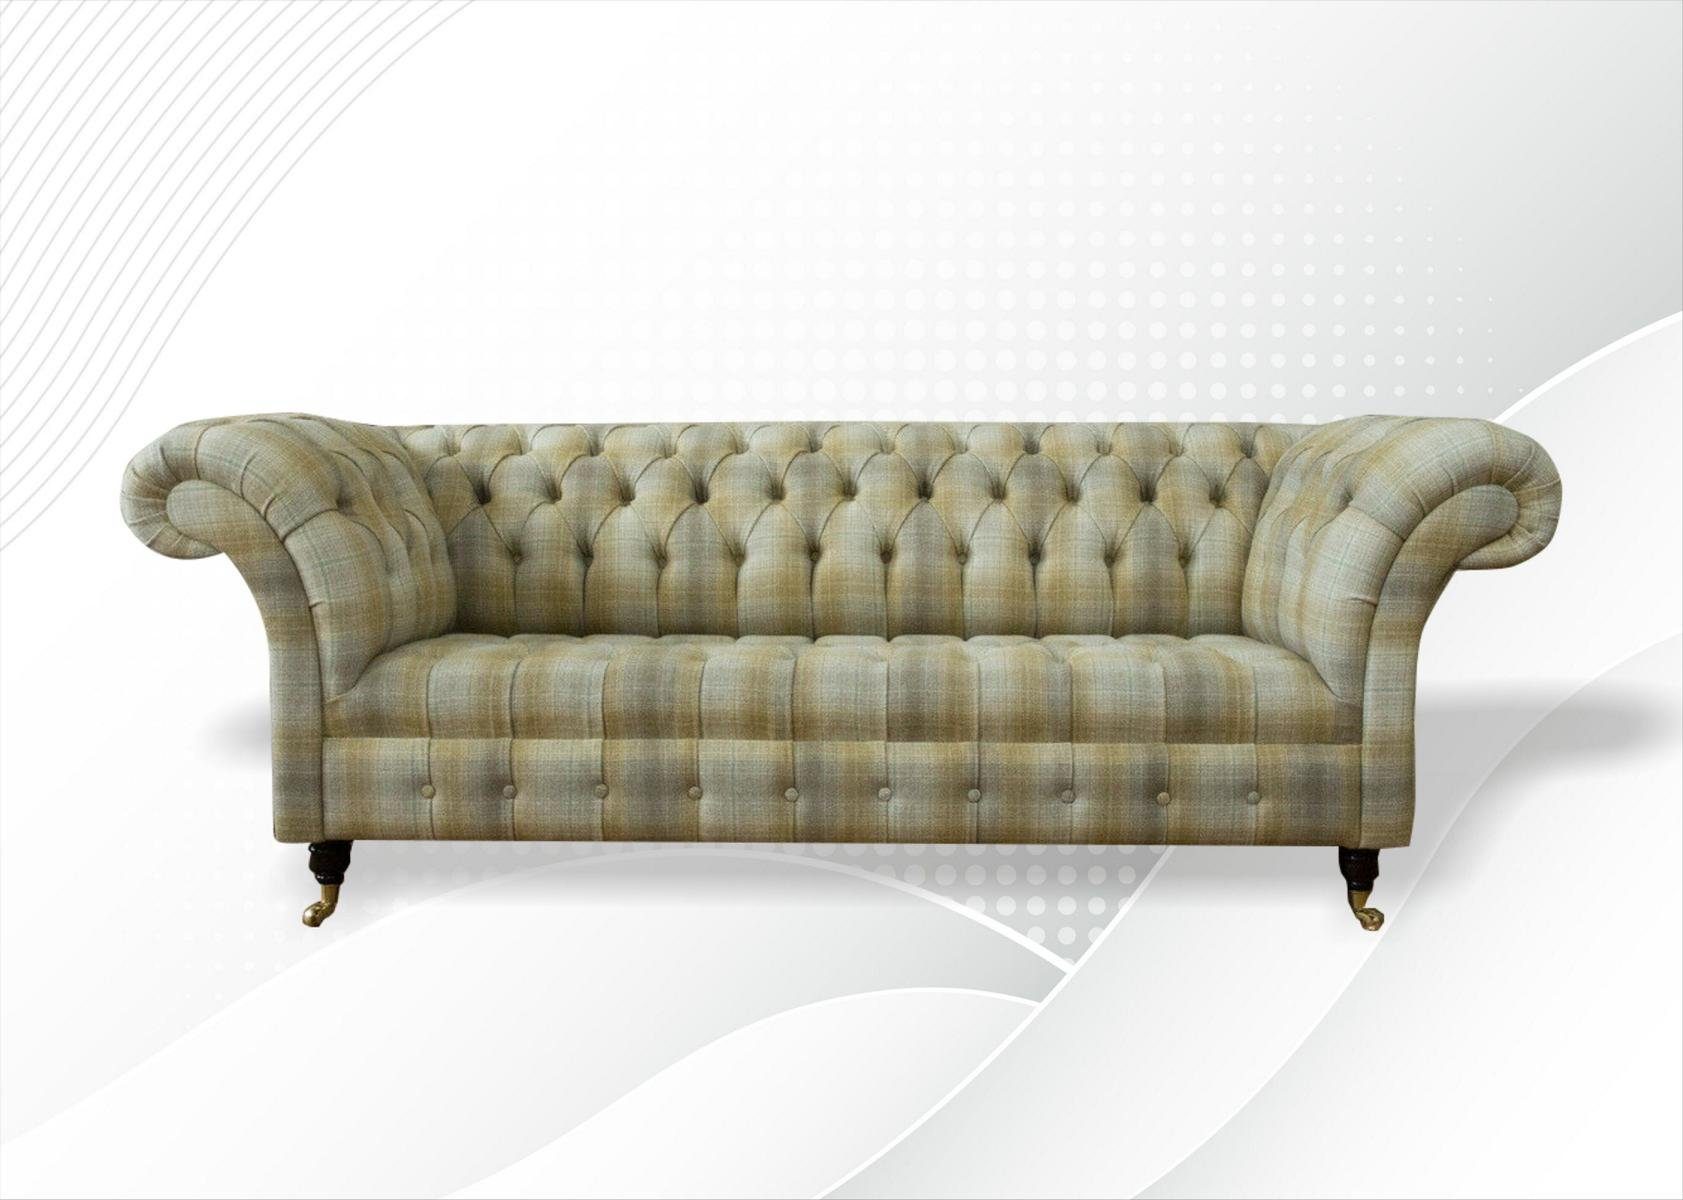 JVmoebel Chesterfield-Sofa, Chesterfield 3+1,5+1 Sitzer Sofa Couch